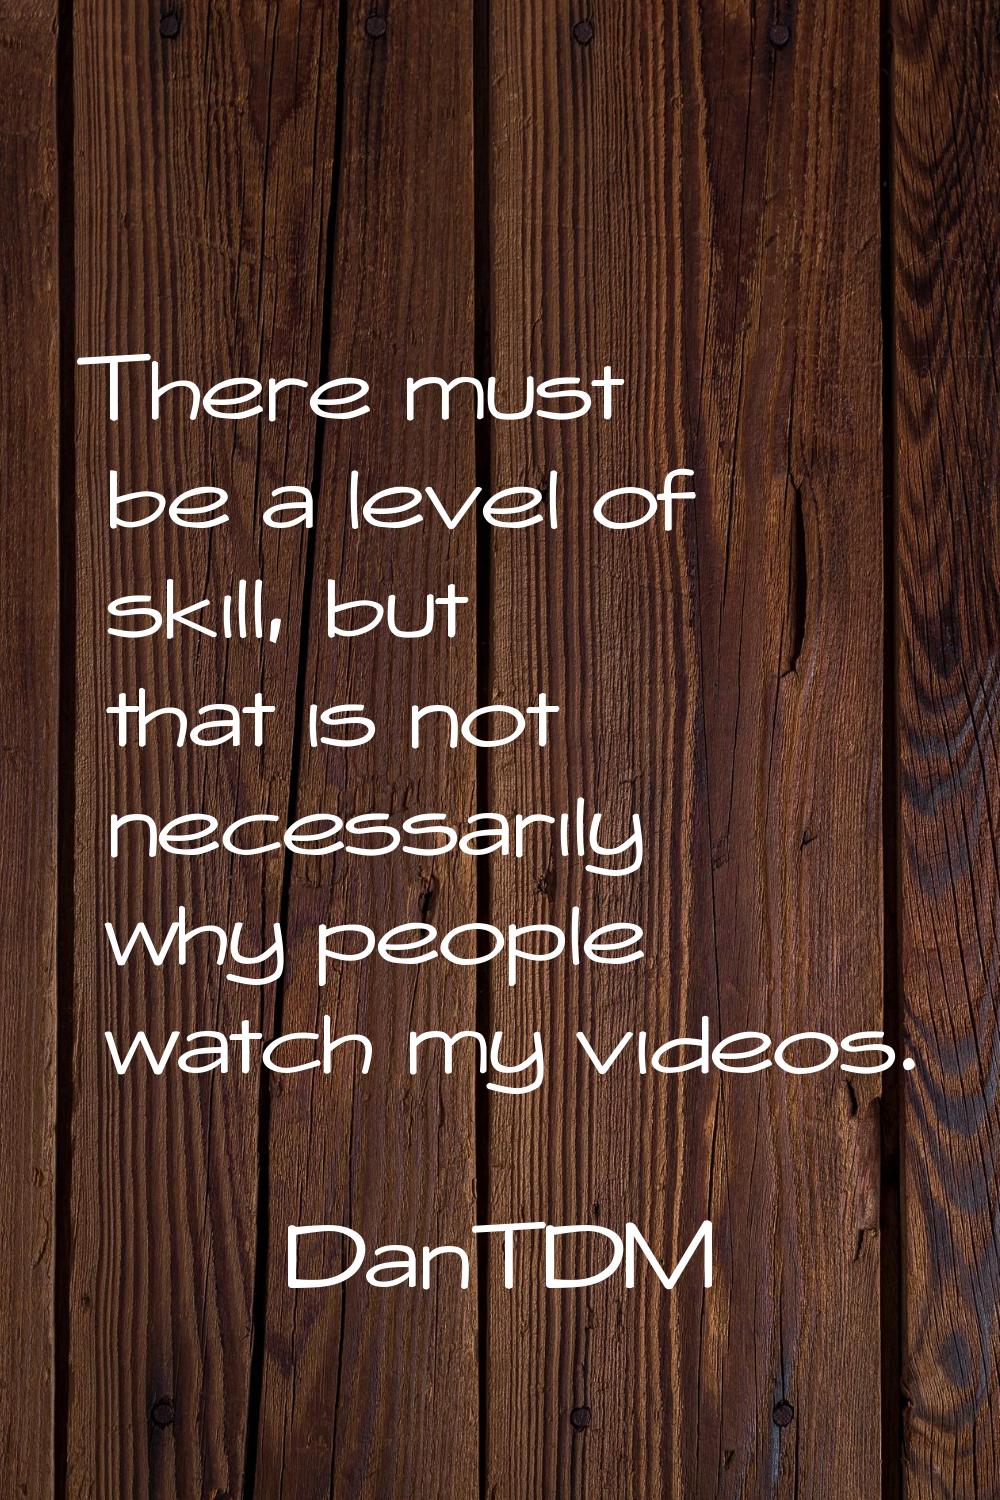 There must be a level of skill, but that is not necessarily why people watch my videos.